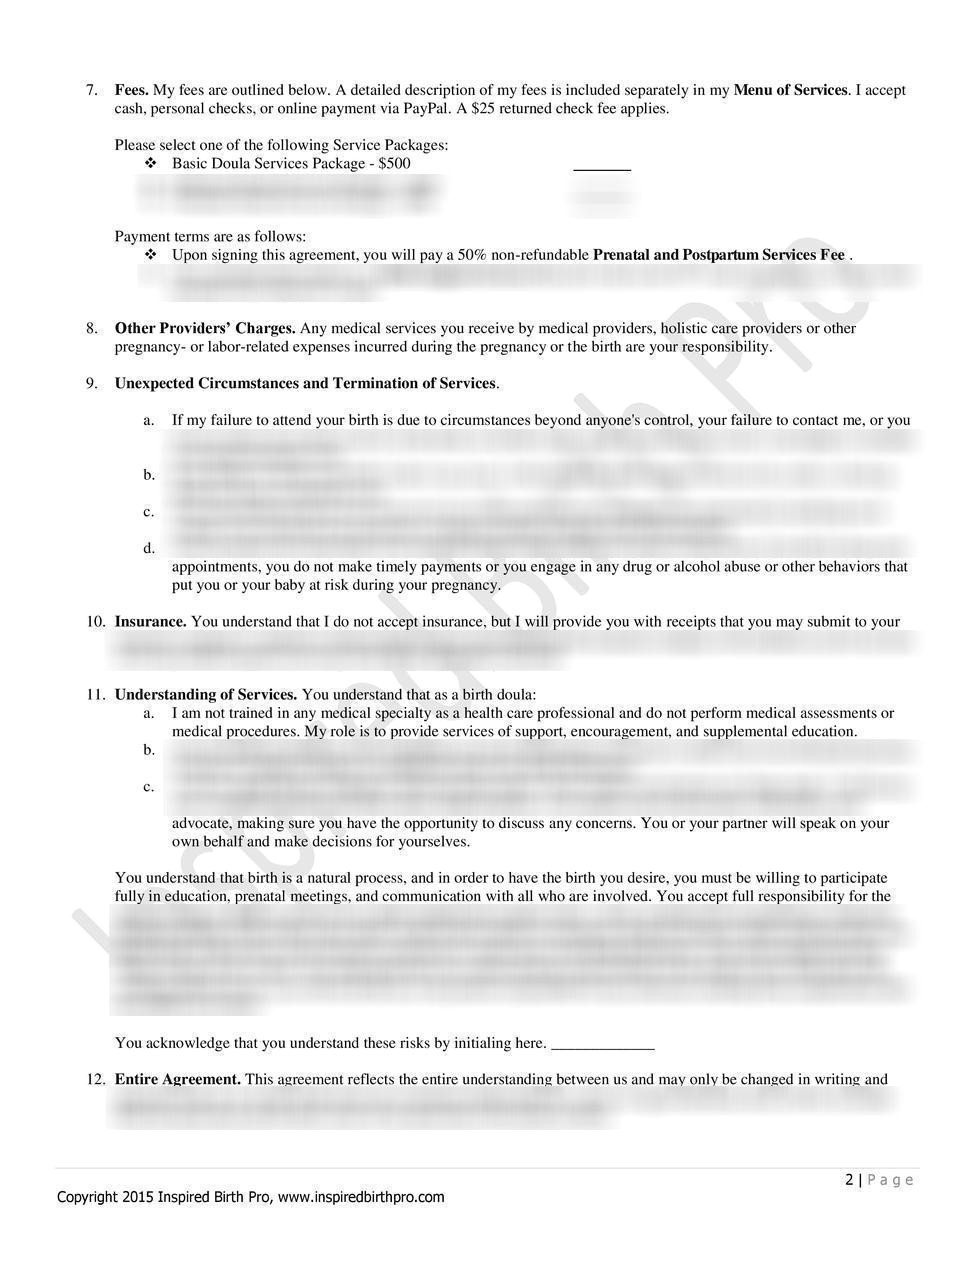 savvy doula business forms